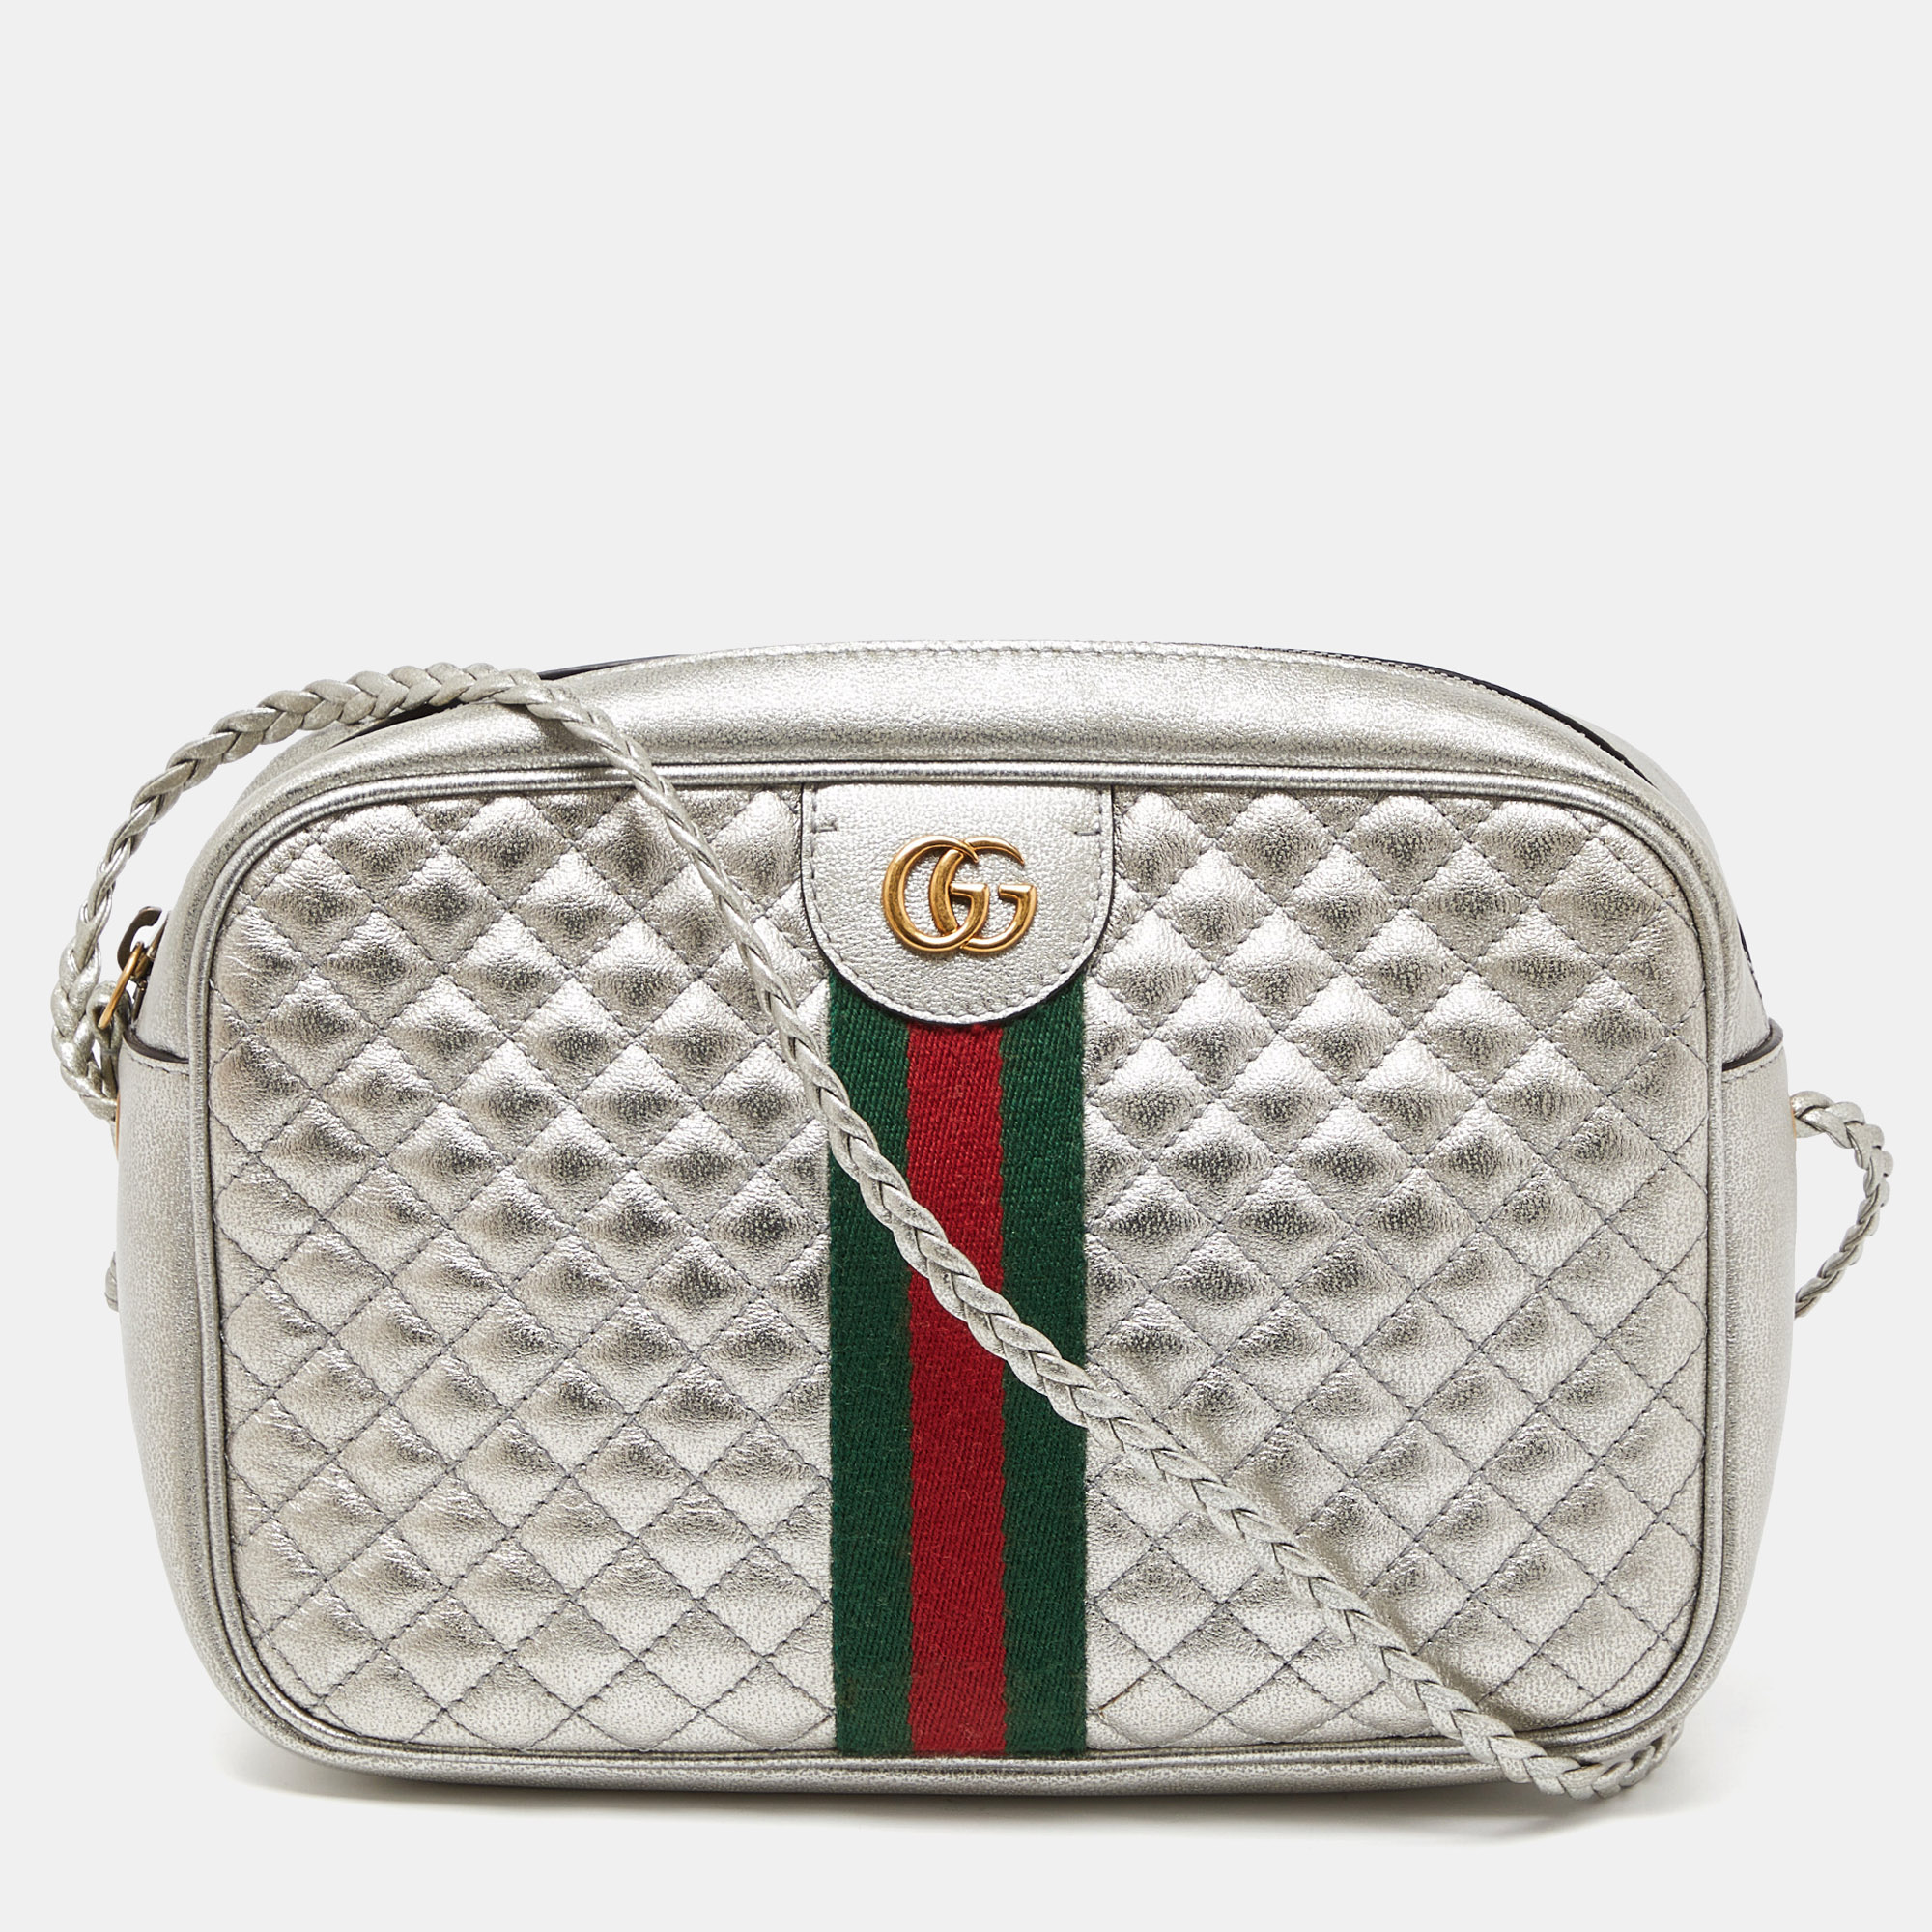 Pre-owned Gucci Silver Quilted Leather Small Trapuntata Shoulder Bag